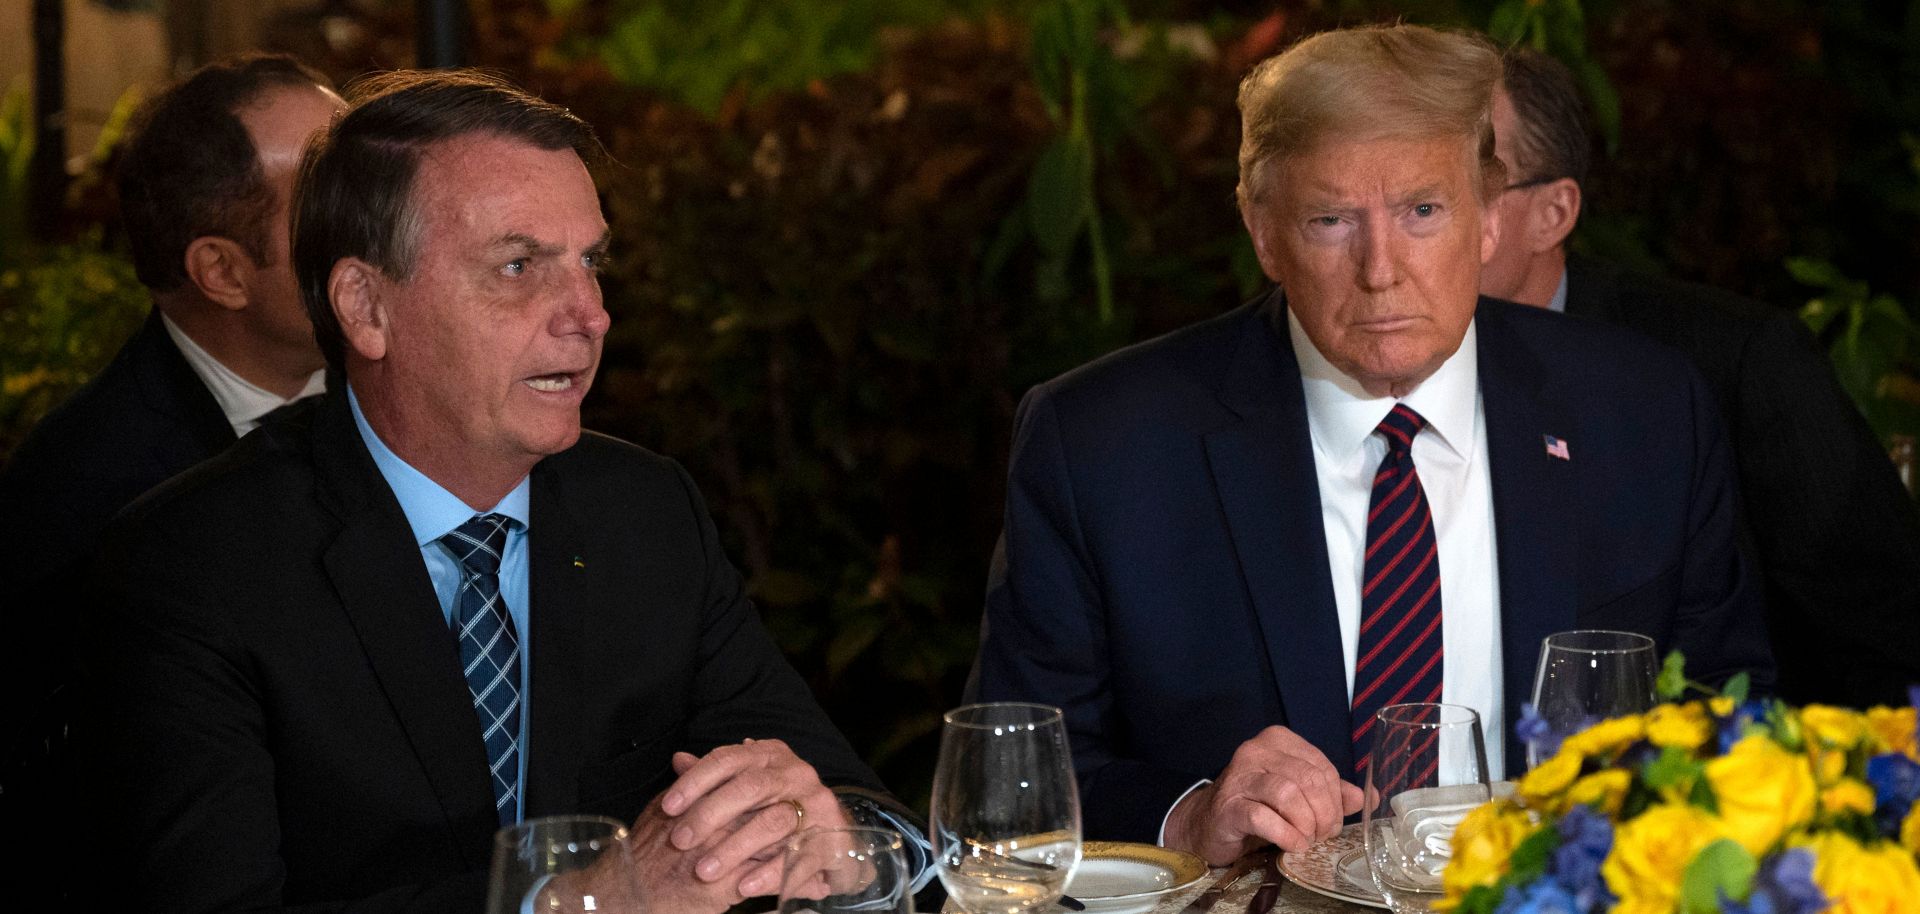 U.S. President Donald Trump (right) speaks with Brazilian President Jair Bolsonaro during a dinner at Mar-a-Lago in Palm Beach, Florida, on March 7, 2020.